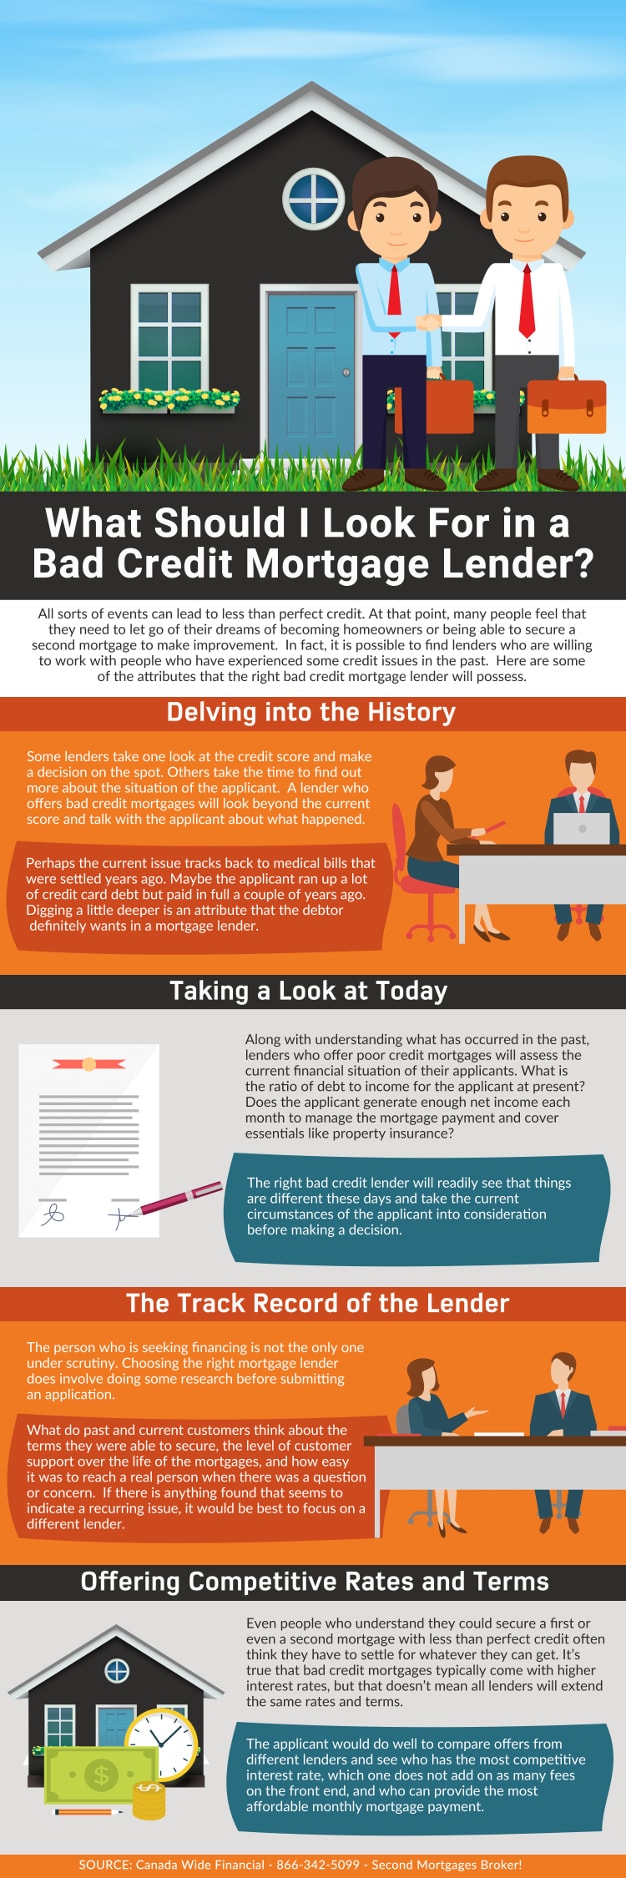 What Should I Look For in a Bad Credit Mortgage Lender - Infographic